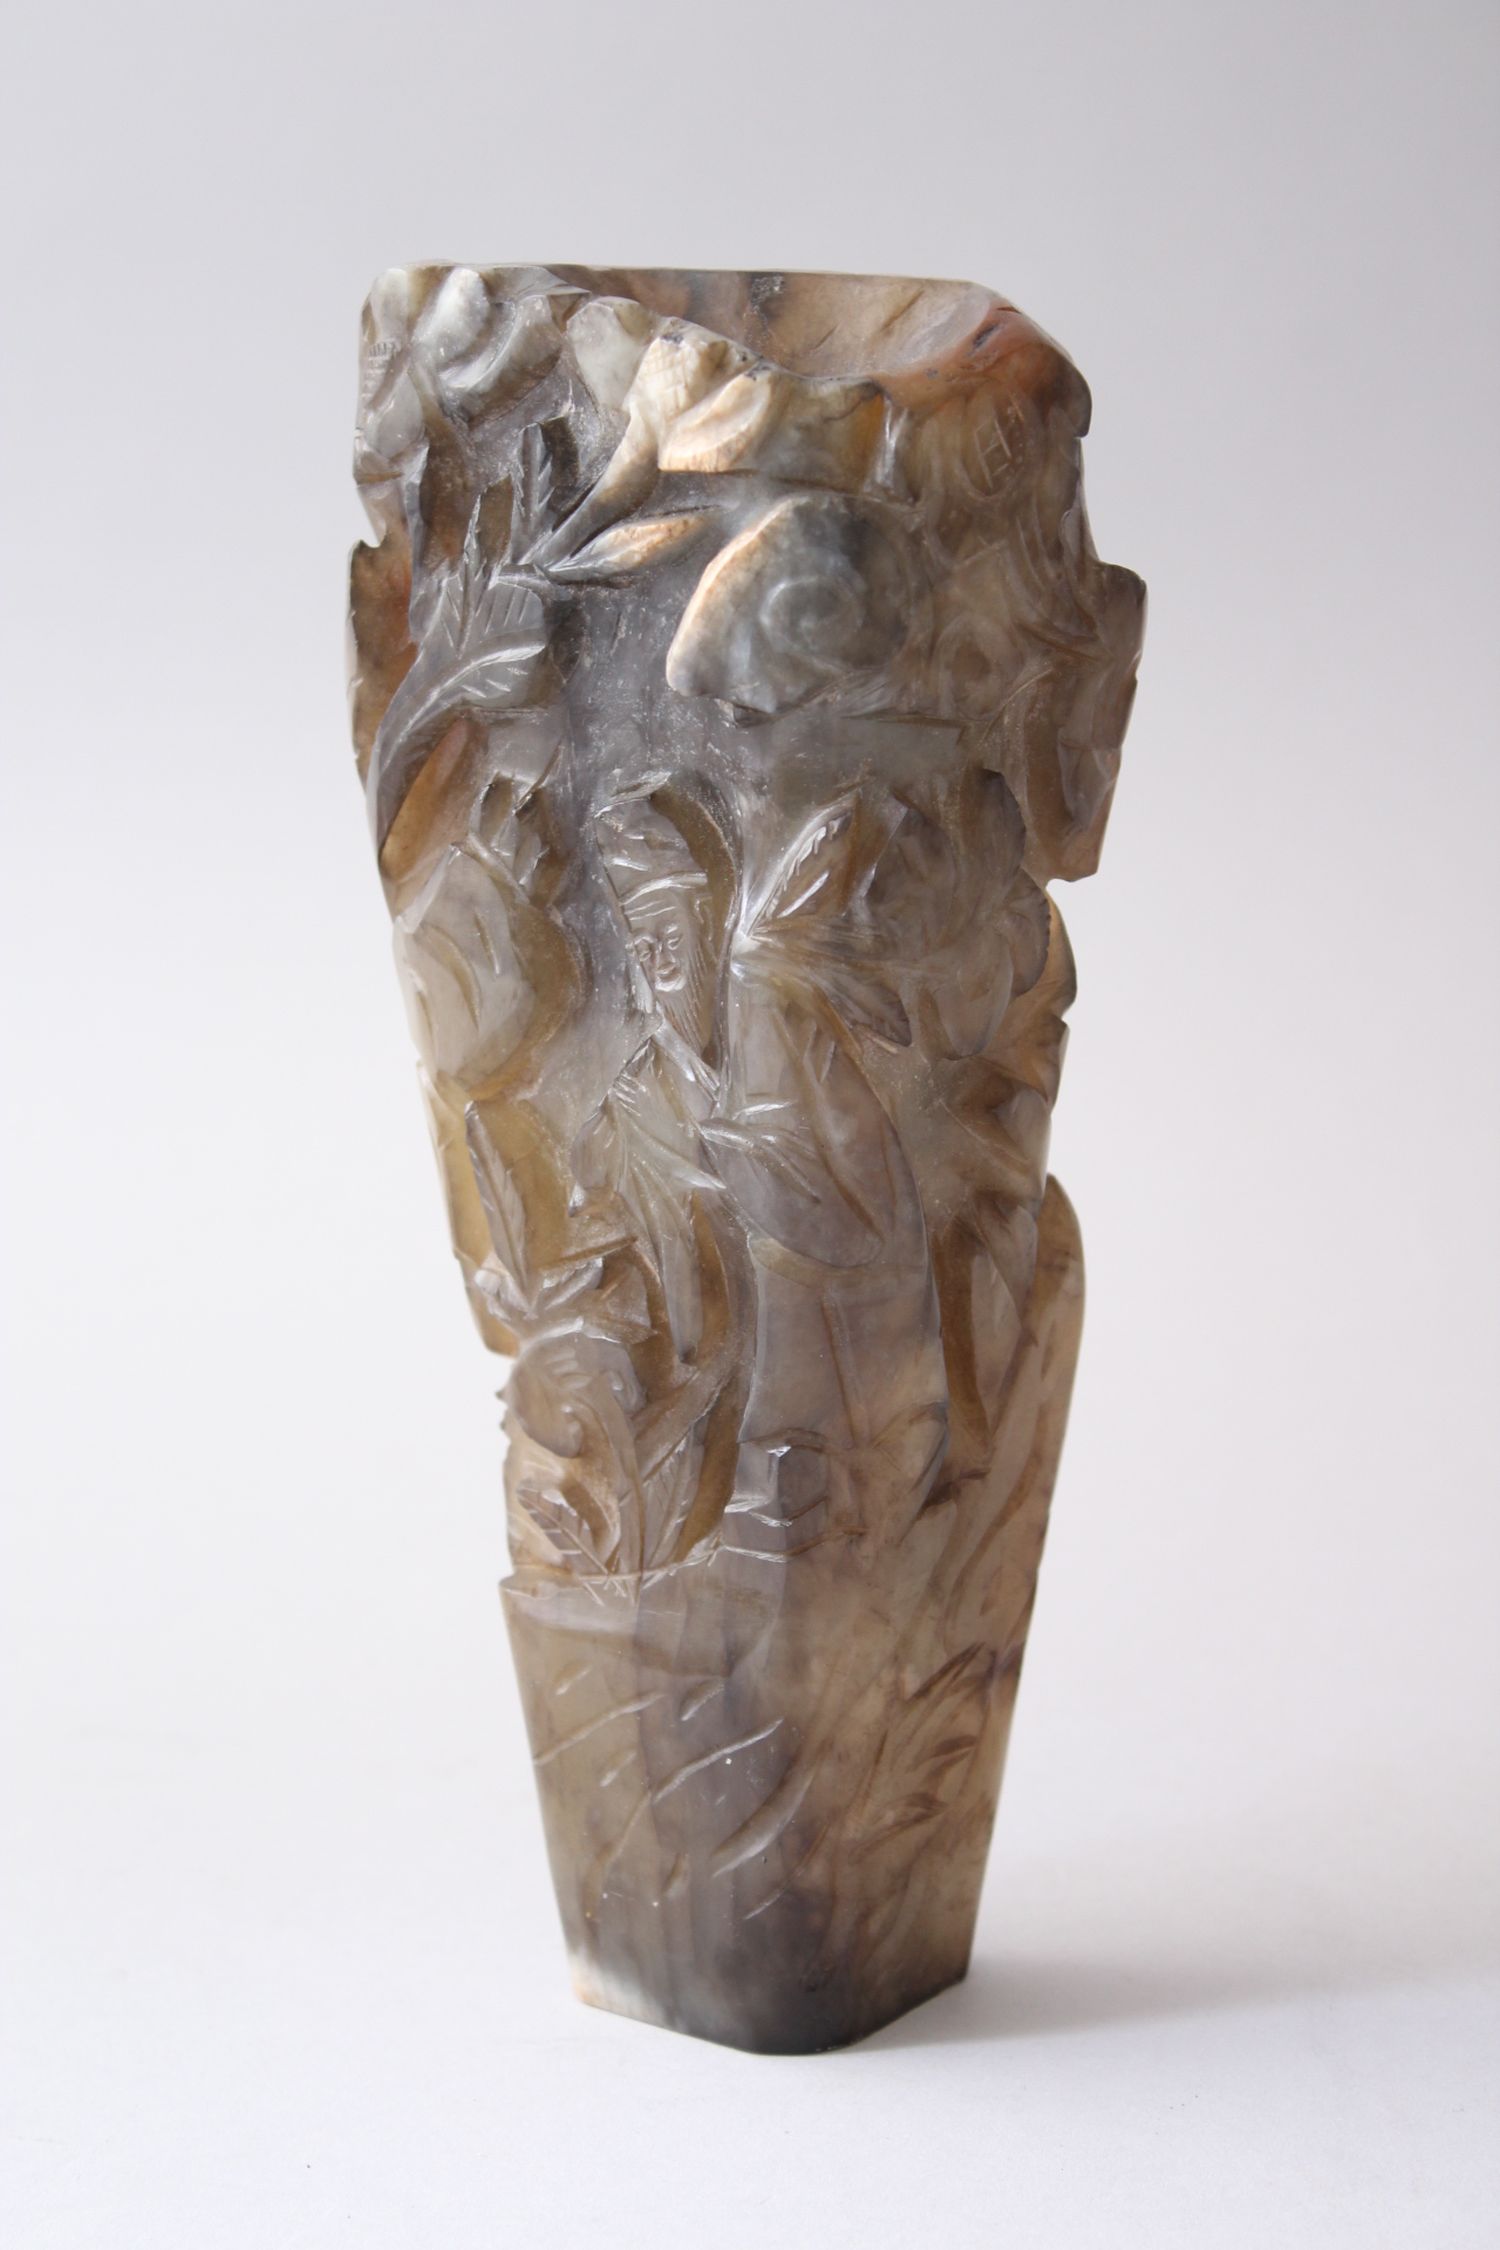 A CHINESE 19TH / 20TH CENTURY JADE CARVING IN THE FORM OF A VASE OR BRUSH HOLDER, with carved scenes - Image 2 of 4